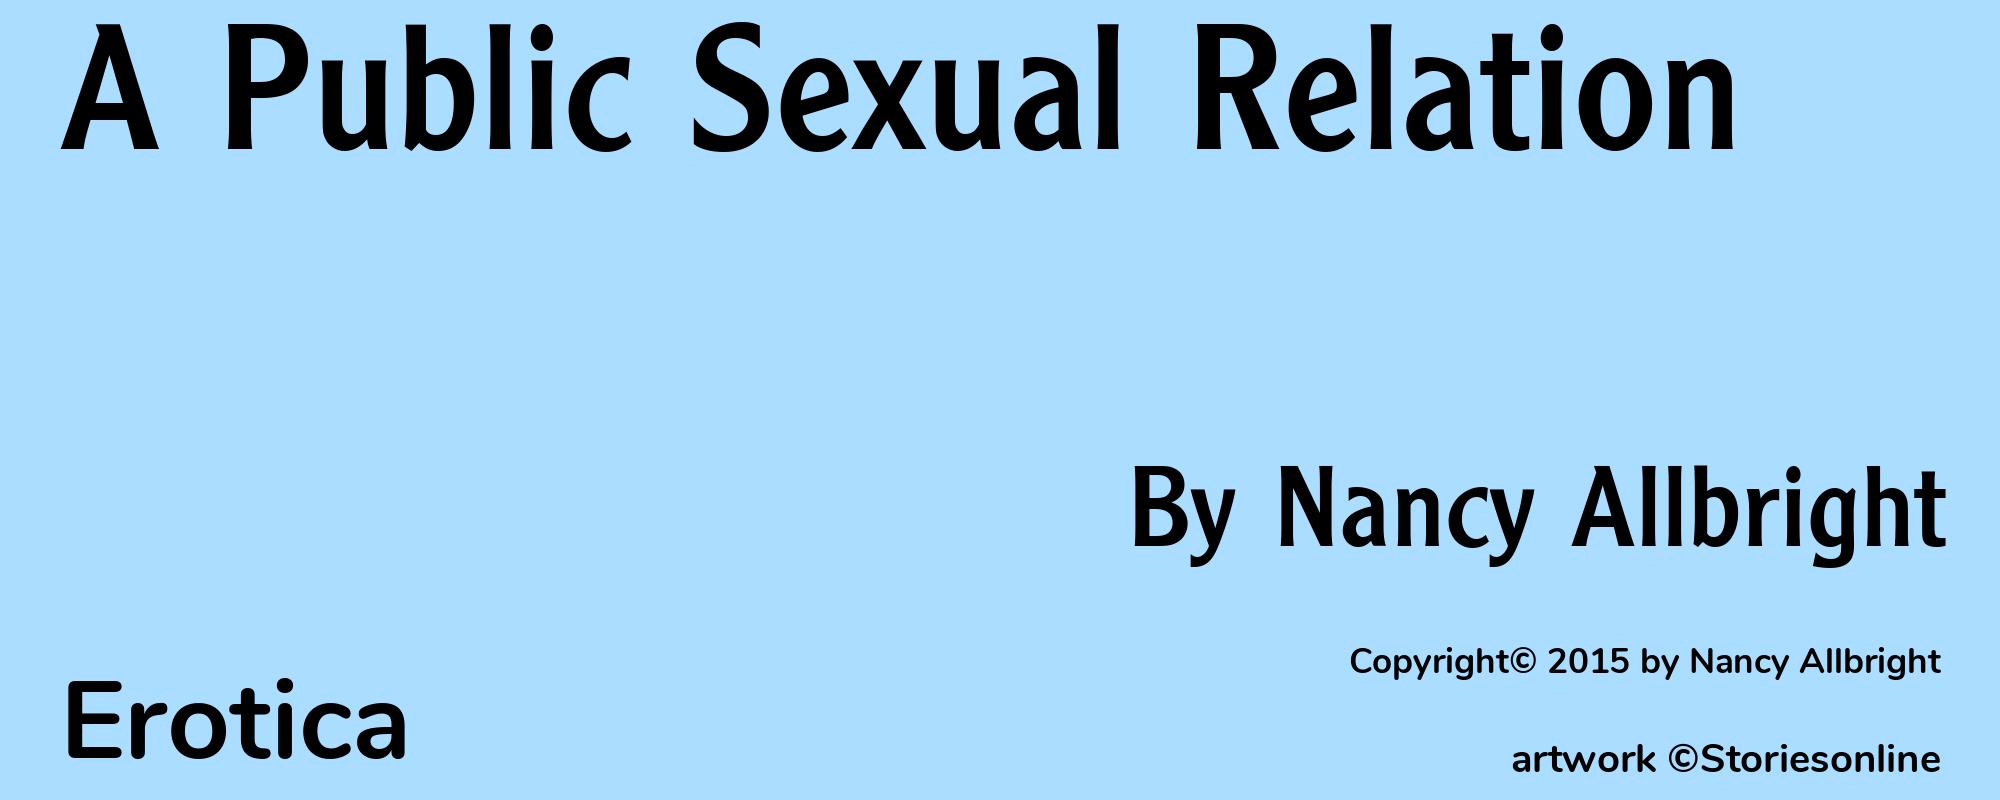 A Public Sexual Relation - Cover